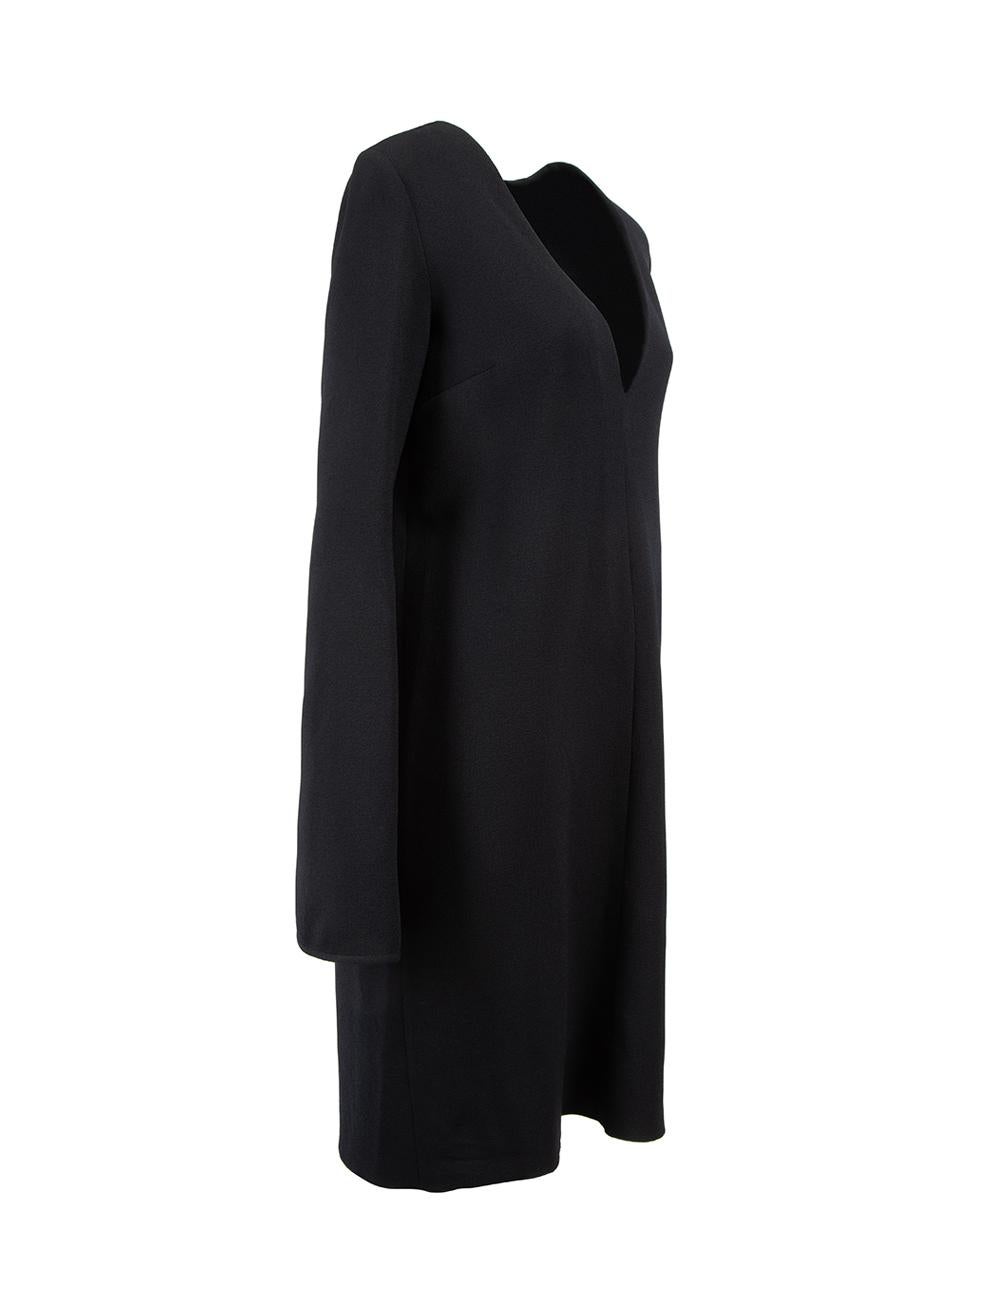 CONDITION is Very good. Hardly any visible wear to dress is evident on this used Ellery designer resale item.



Details


Black

Polytester

Knee length dress

Long flared sleeves with slit

V-neck

Loose fit

Back zip fastening





Made in